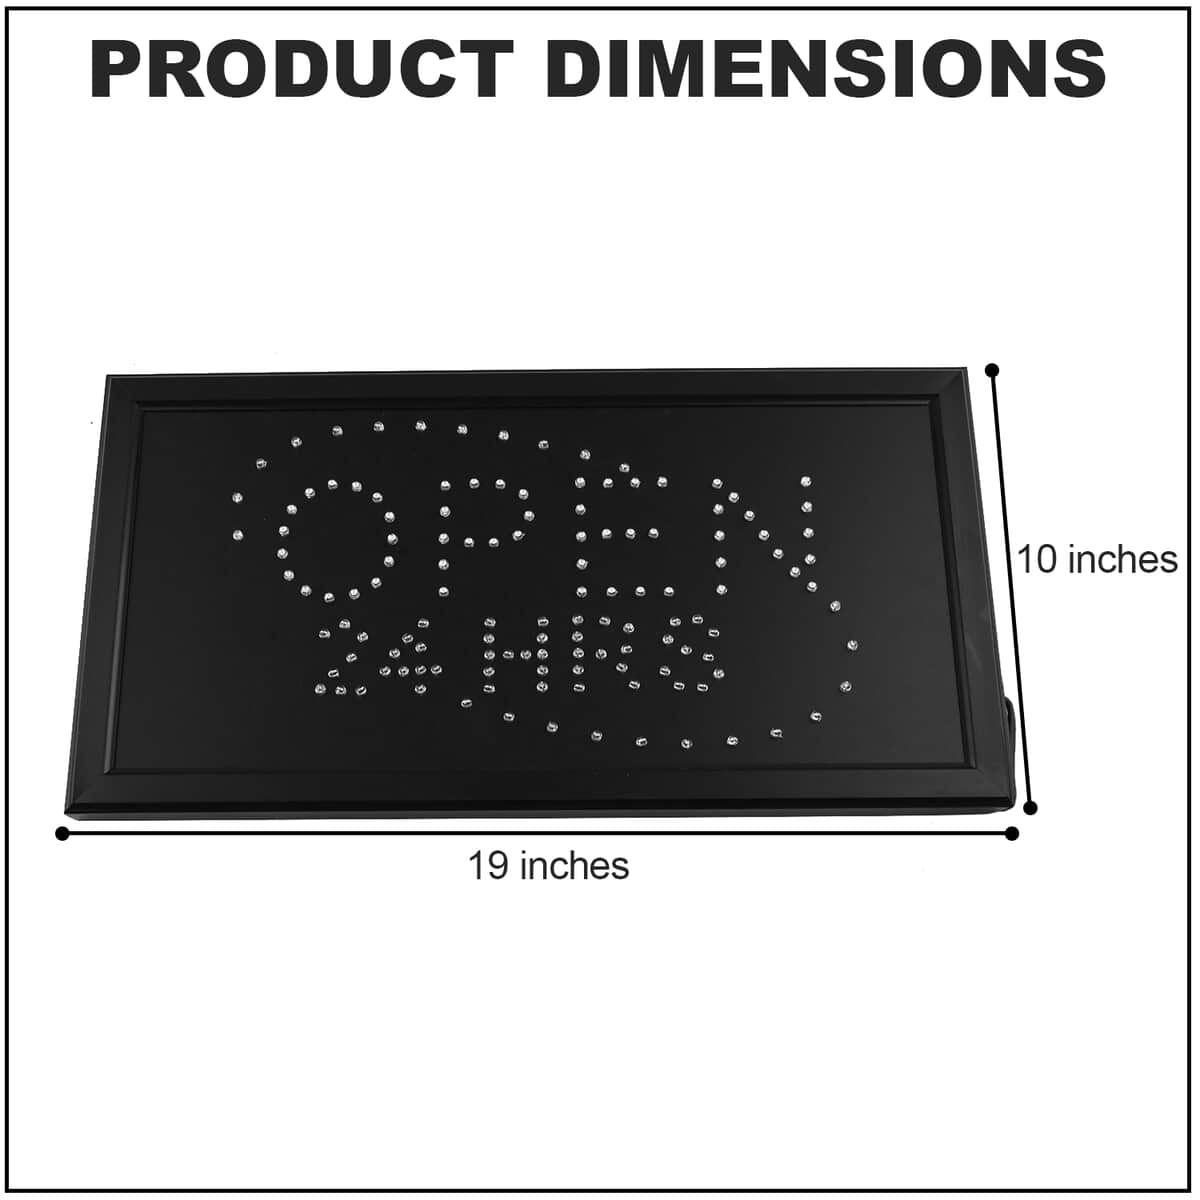 LED SIGN, LIGHTED OPEN 24 HOURS WITH IN LINE SWITCH Wall Decor image number 3